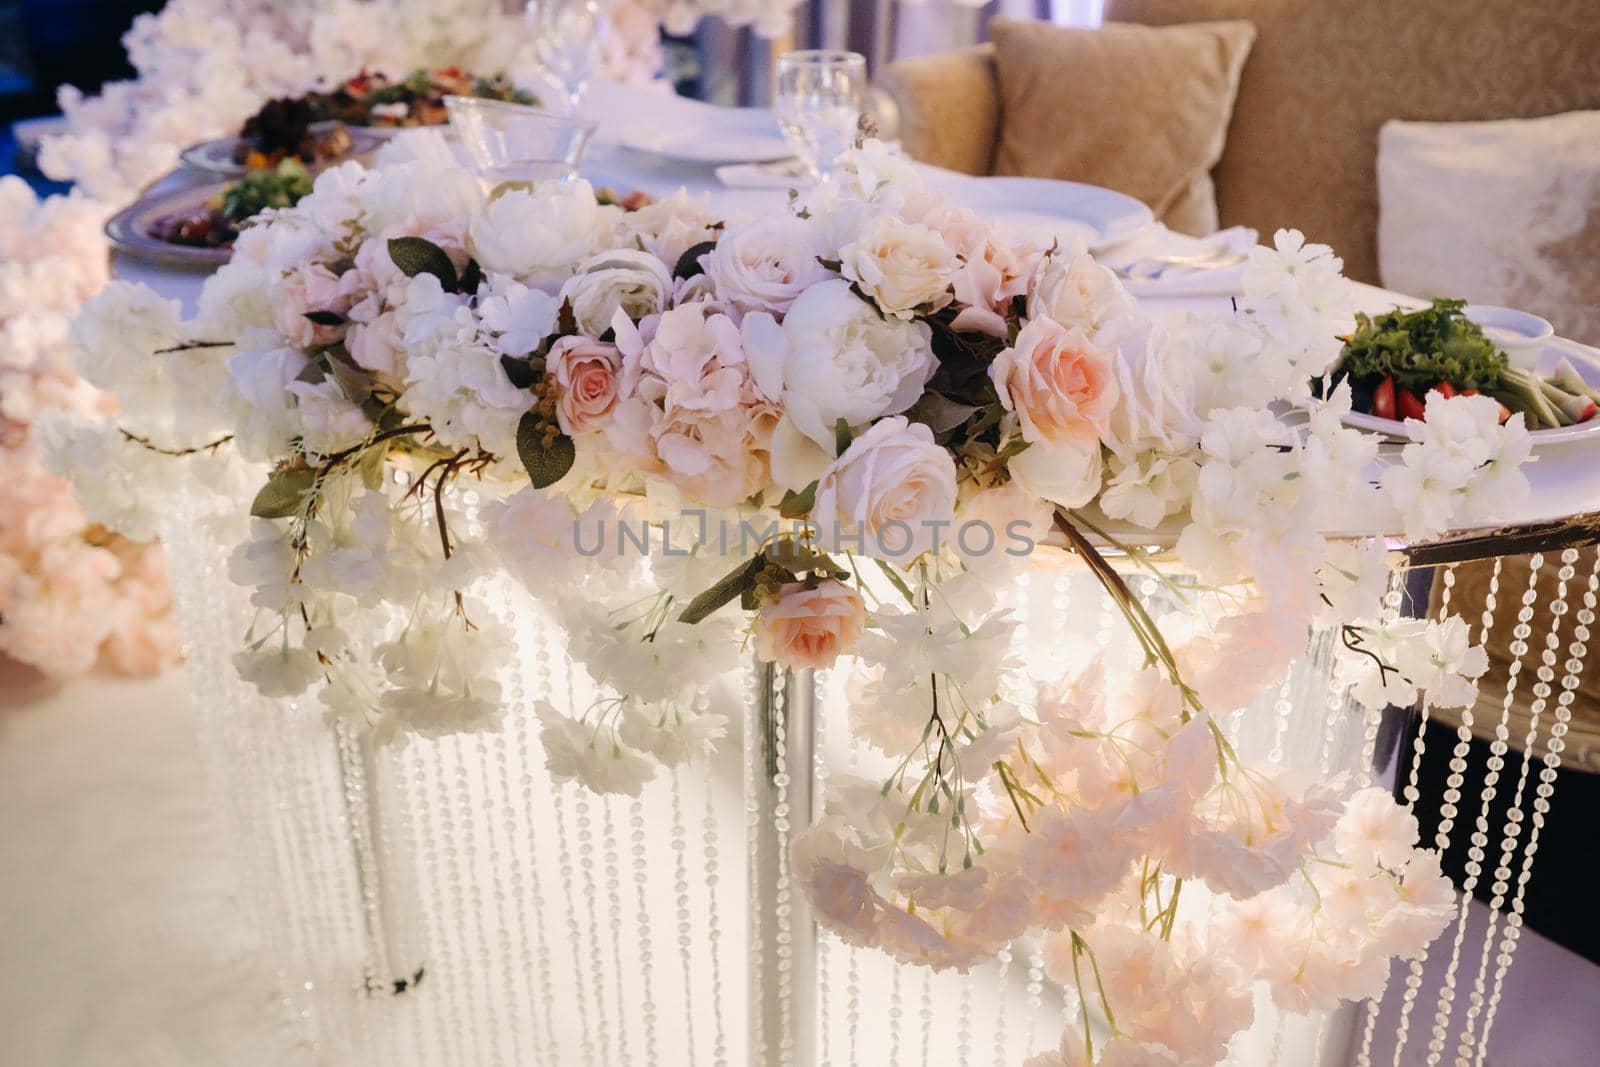 Decorated Table for a wedding reception in a restaurant .Wedding decor by Lobachad